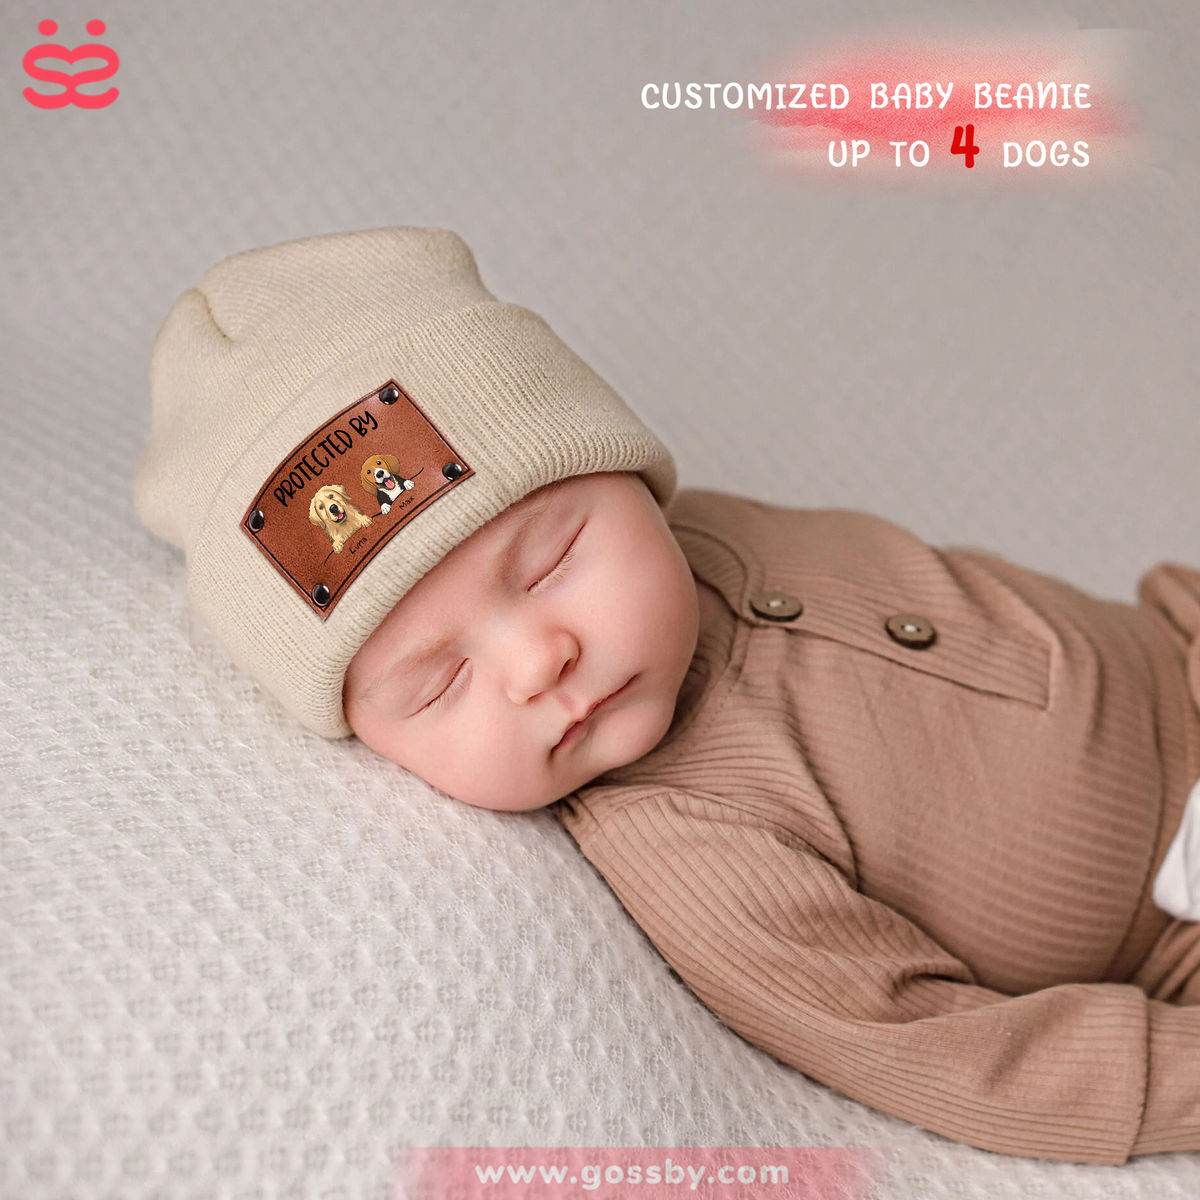 Custom Baby Beanie - Protected By Dogs - Cute Baby Shower Gift (M1)_2